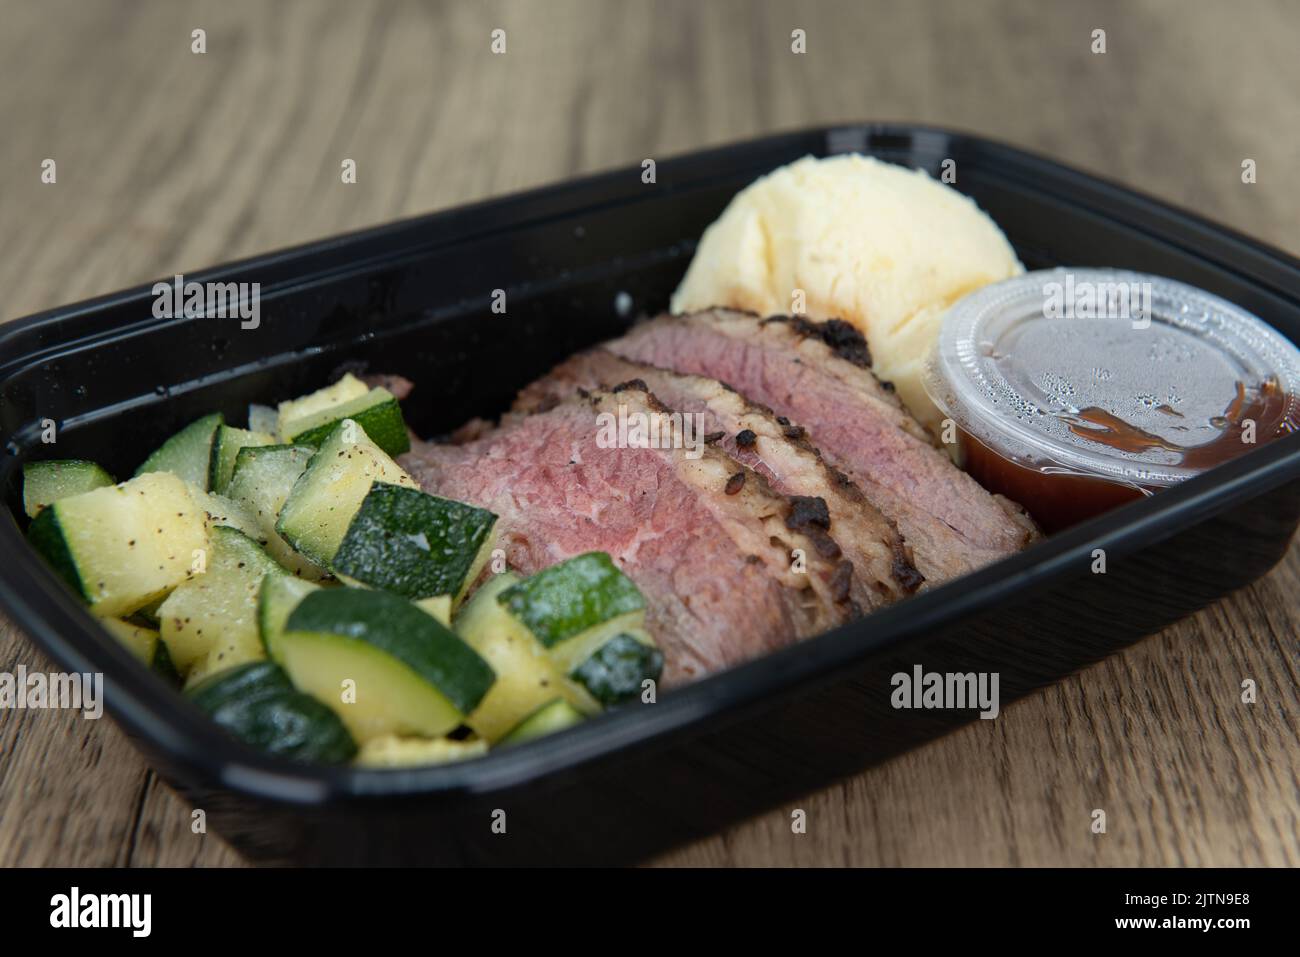 Take out order of Tri tip steak with mashed potatoes is conveniently packed in a microwavable container. Stock Photo